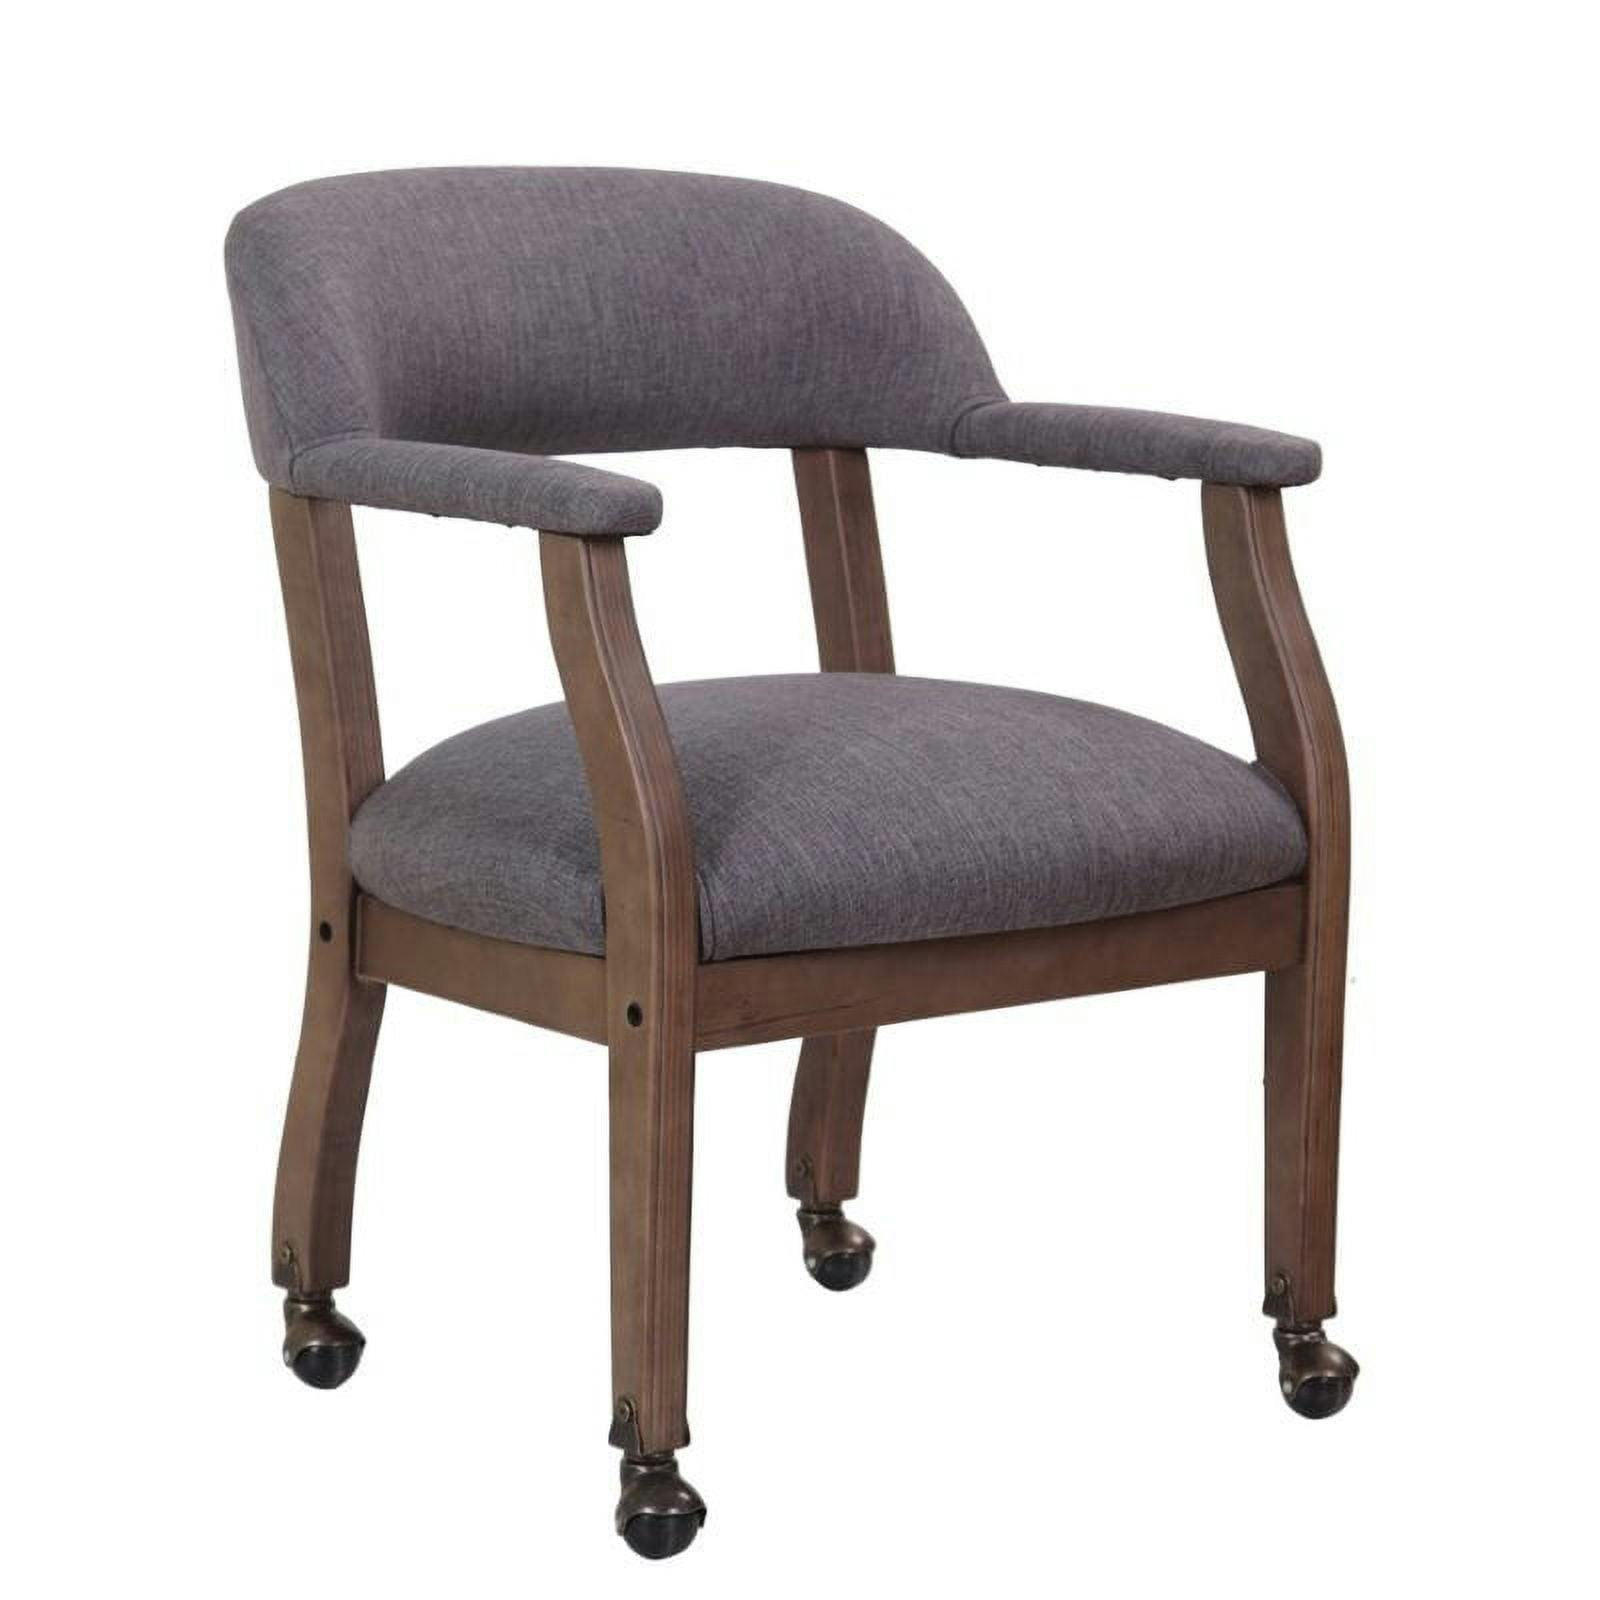 Refined Rustic Slate Gray Linen Captain's Desk Chair with Casters